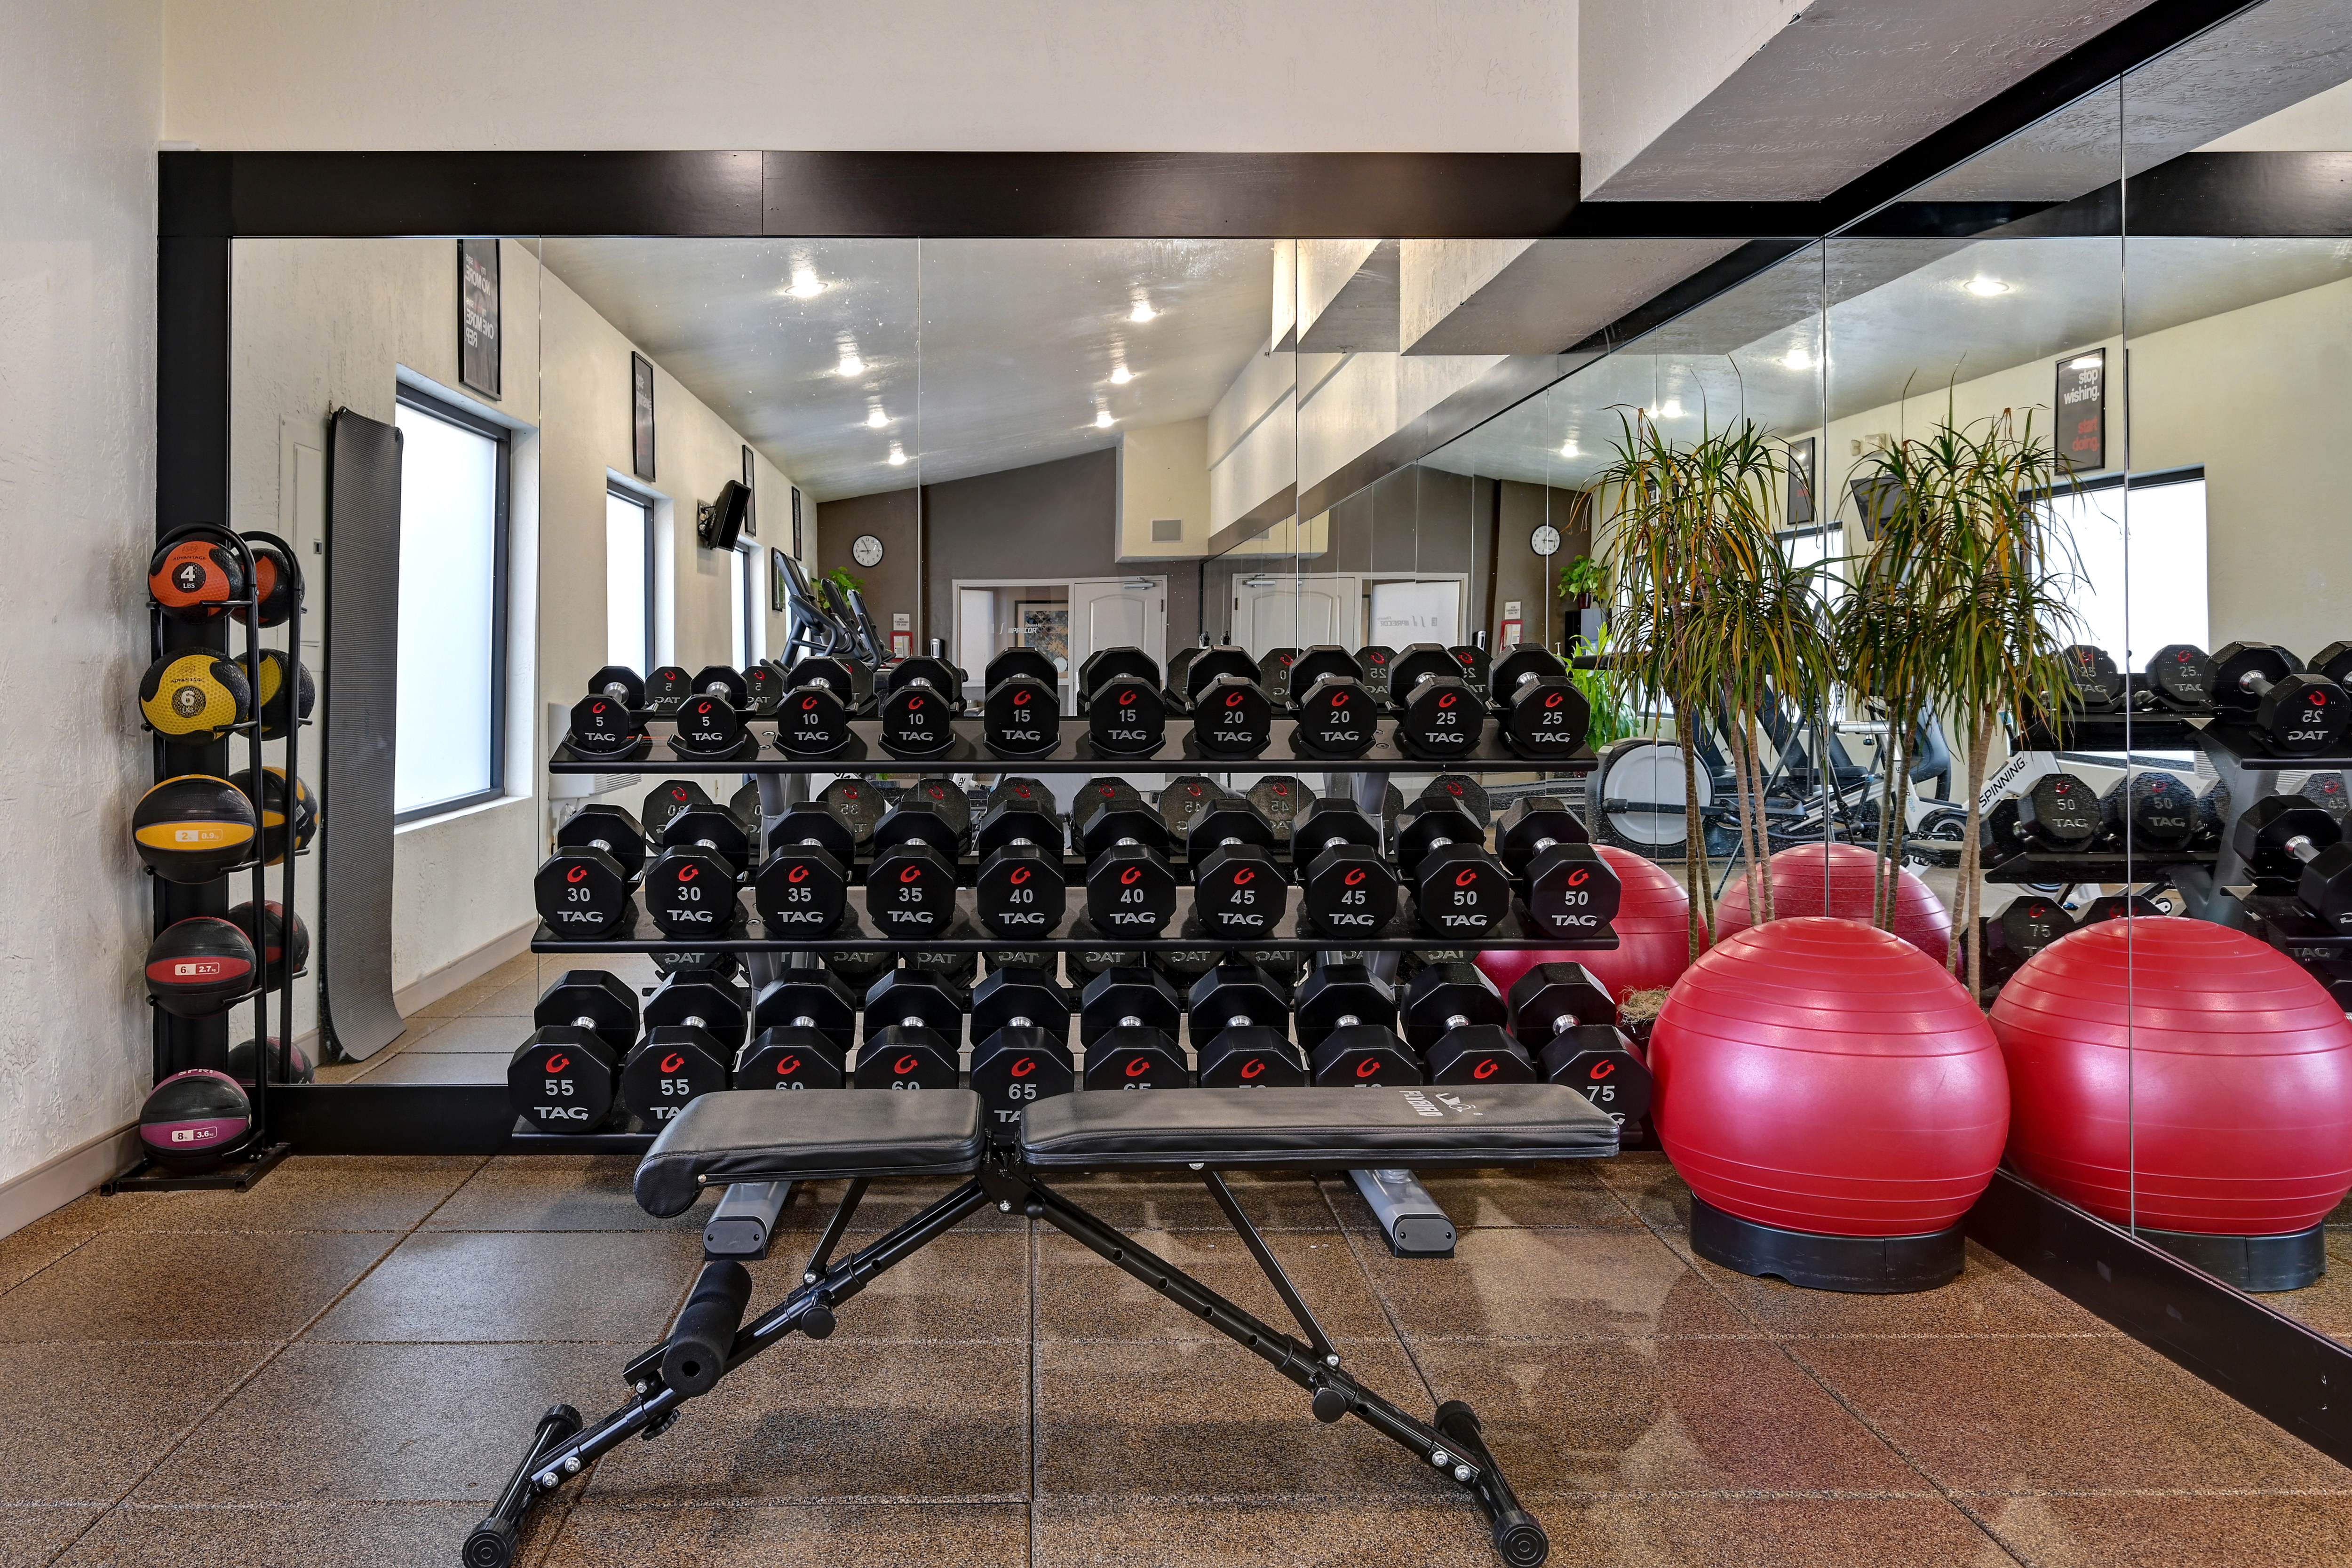 Weights and Exercise Balls in Fitness Center